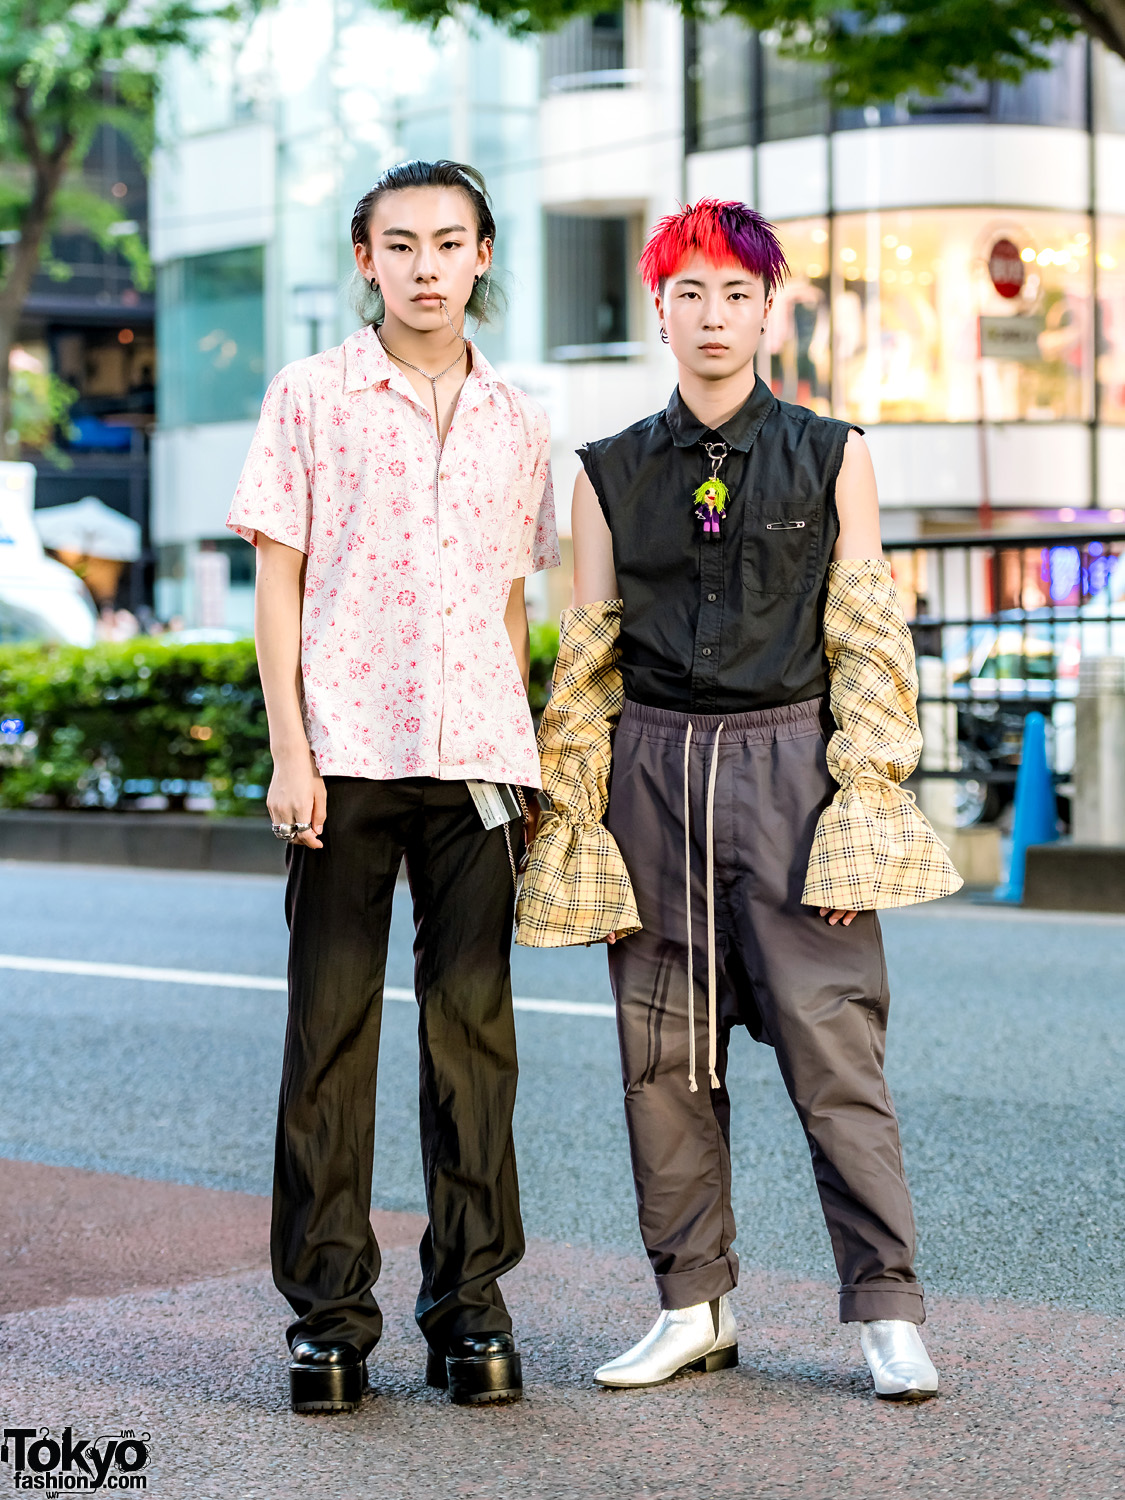 Japanese Remake Streetwear w/ Floral Shirt, Burberry Gingham Sleeves, Rick Owens & Vaquera